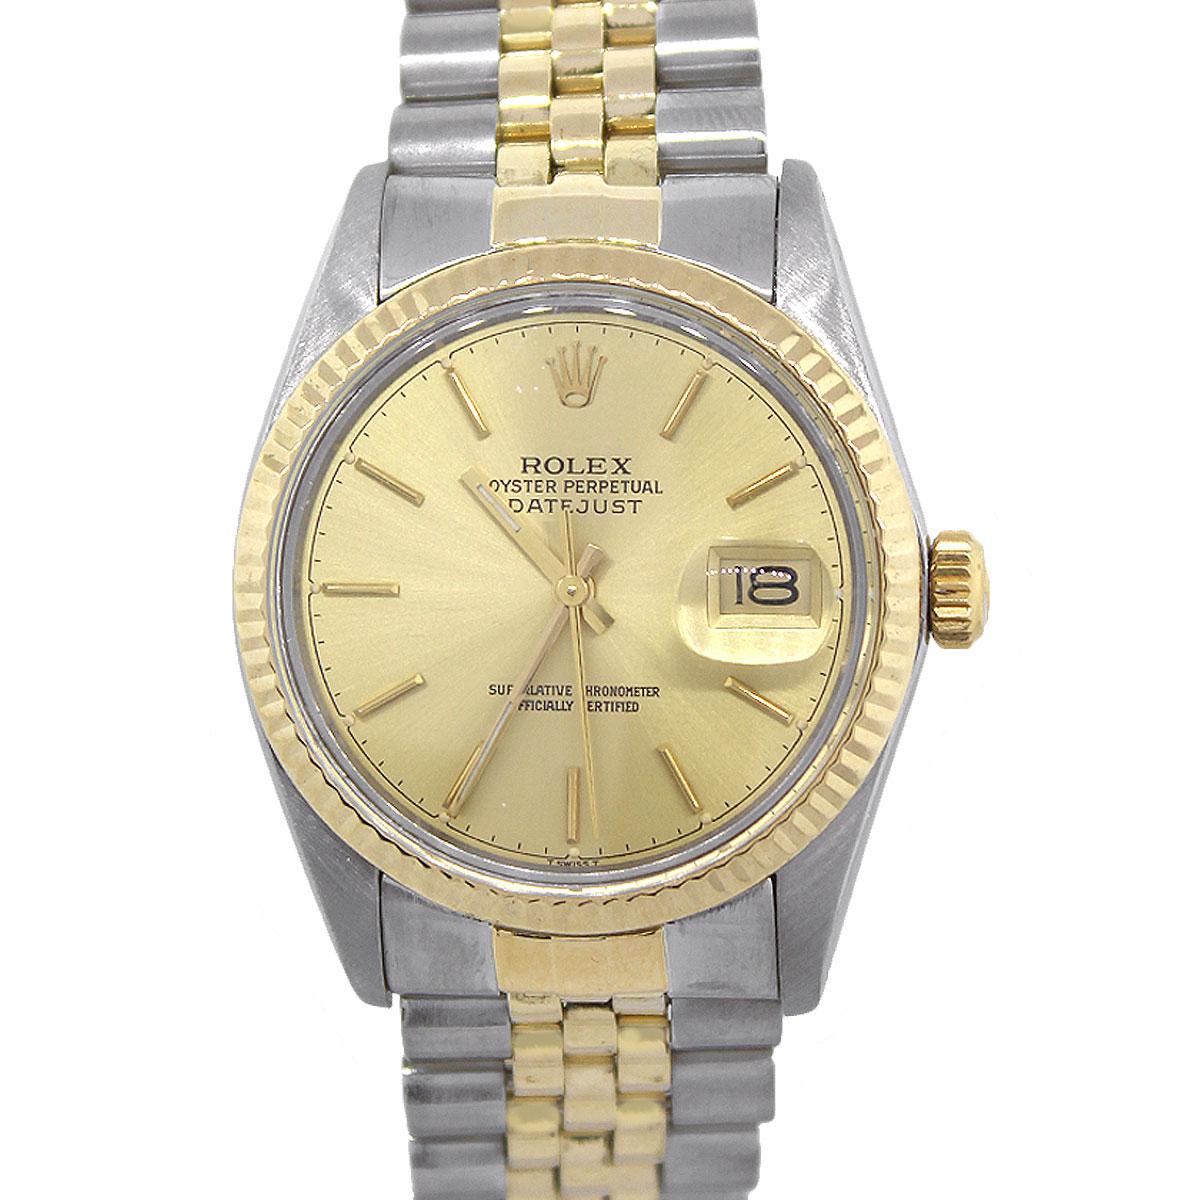 Brand: Rolex
MPN: 16013
Model: Datejust
Case Material: Stainless steel
Case Diameter: 36mm
Crystal: Plastic
Bezel: 18k yellow gold fluted bezel
Dial: Champagne Dial with yellow gold sticks and hands. Date can be found at 3 O’clock
Bracelet: 18k